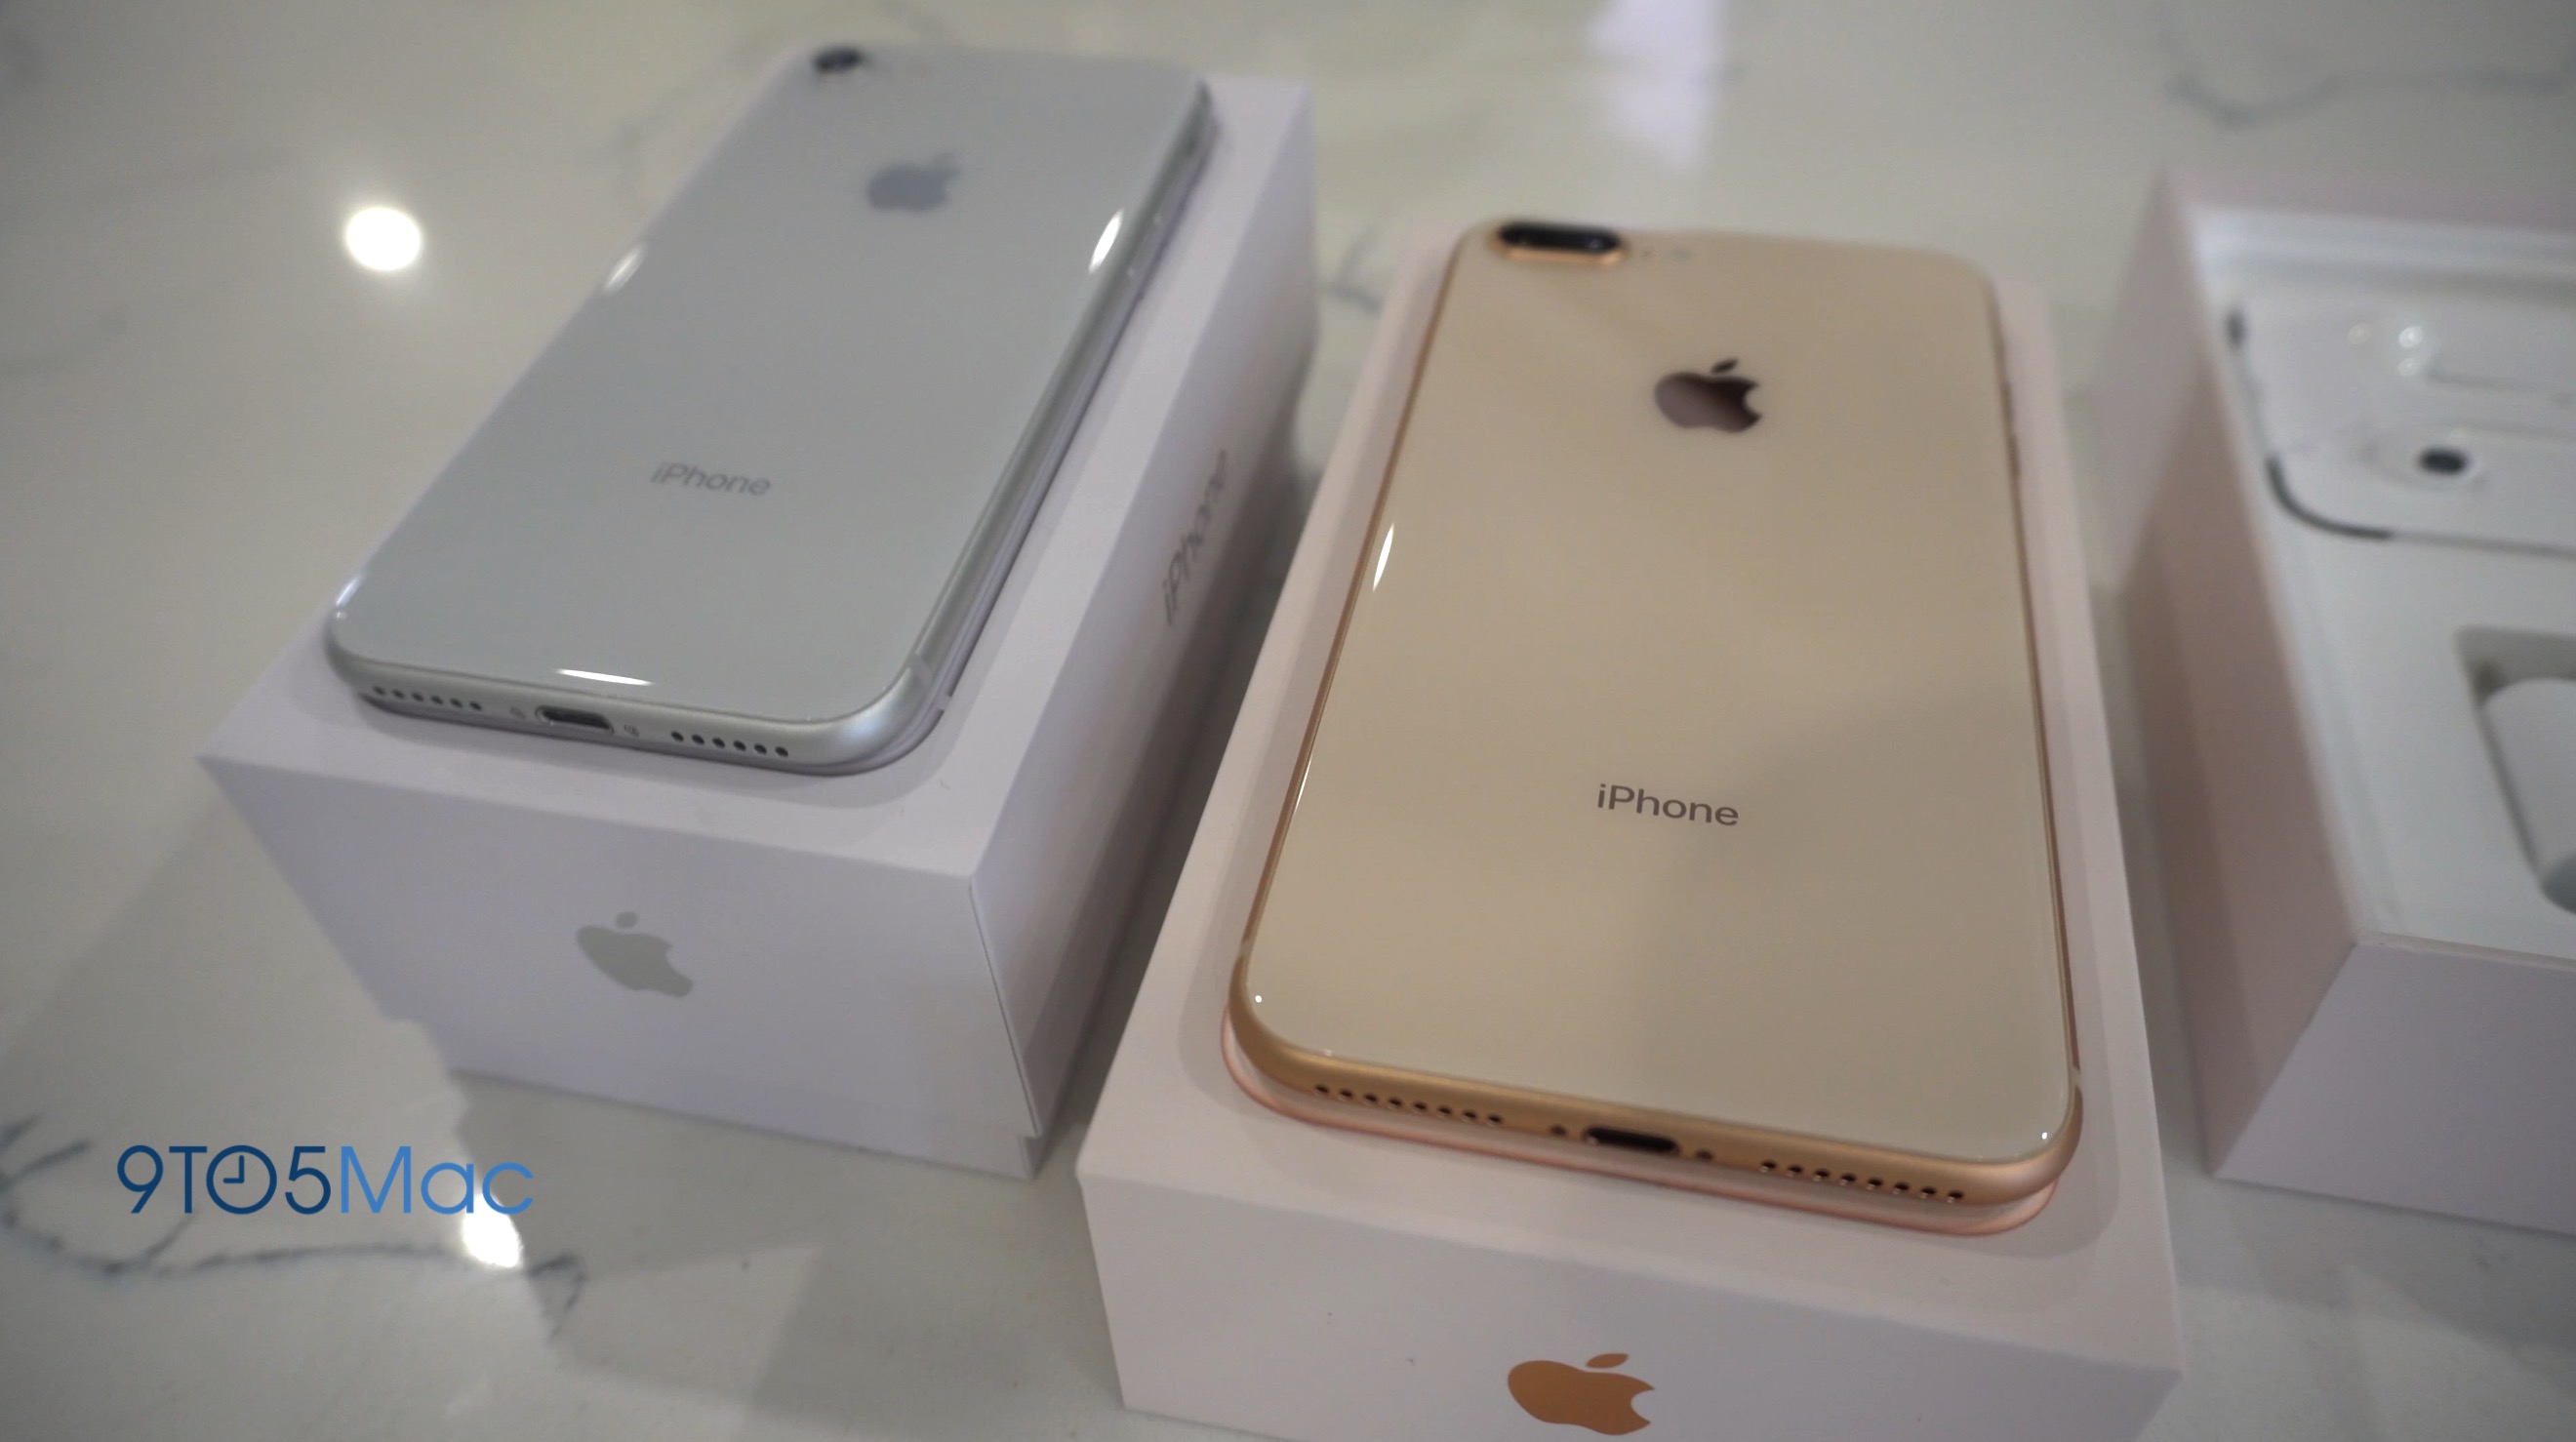 iPhone-8-plus-review-9to5mac-04